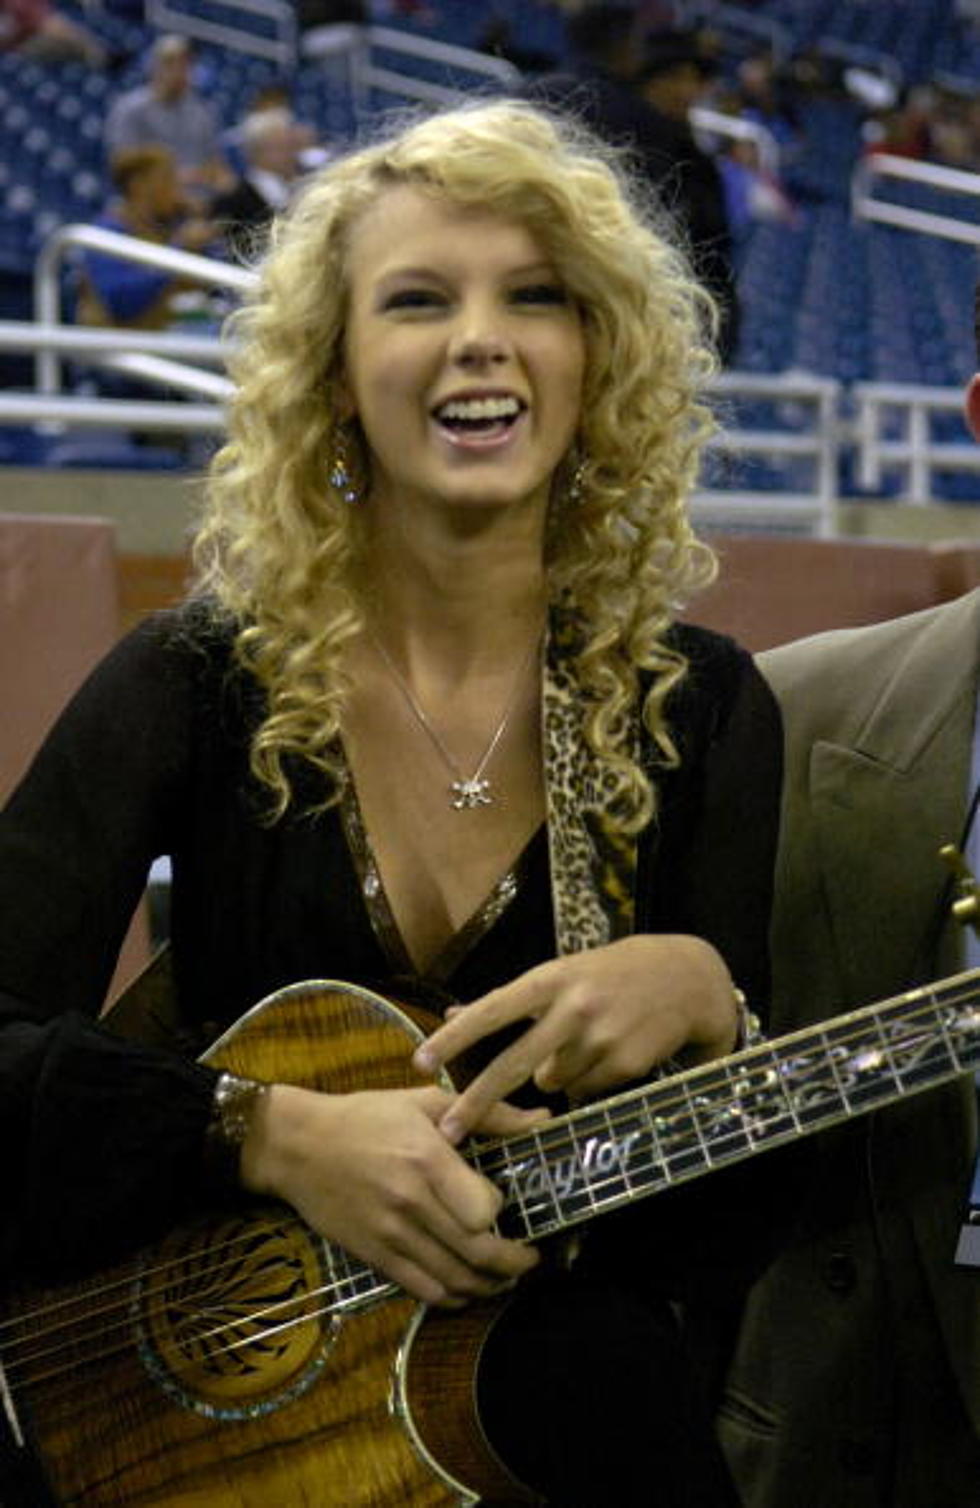 Remember Taylor Swift’s Curly Hair and Cowboy Boots?